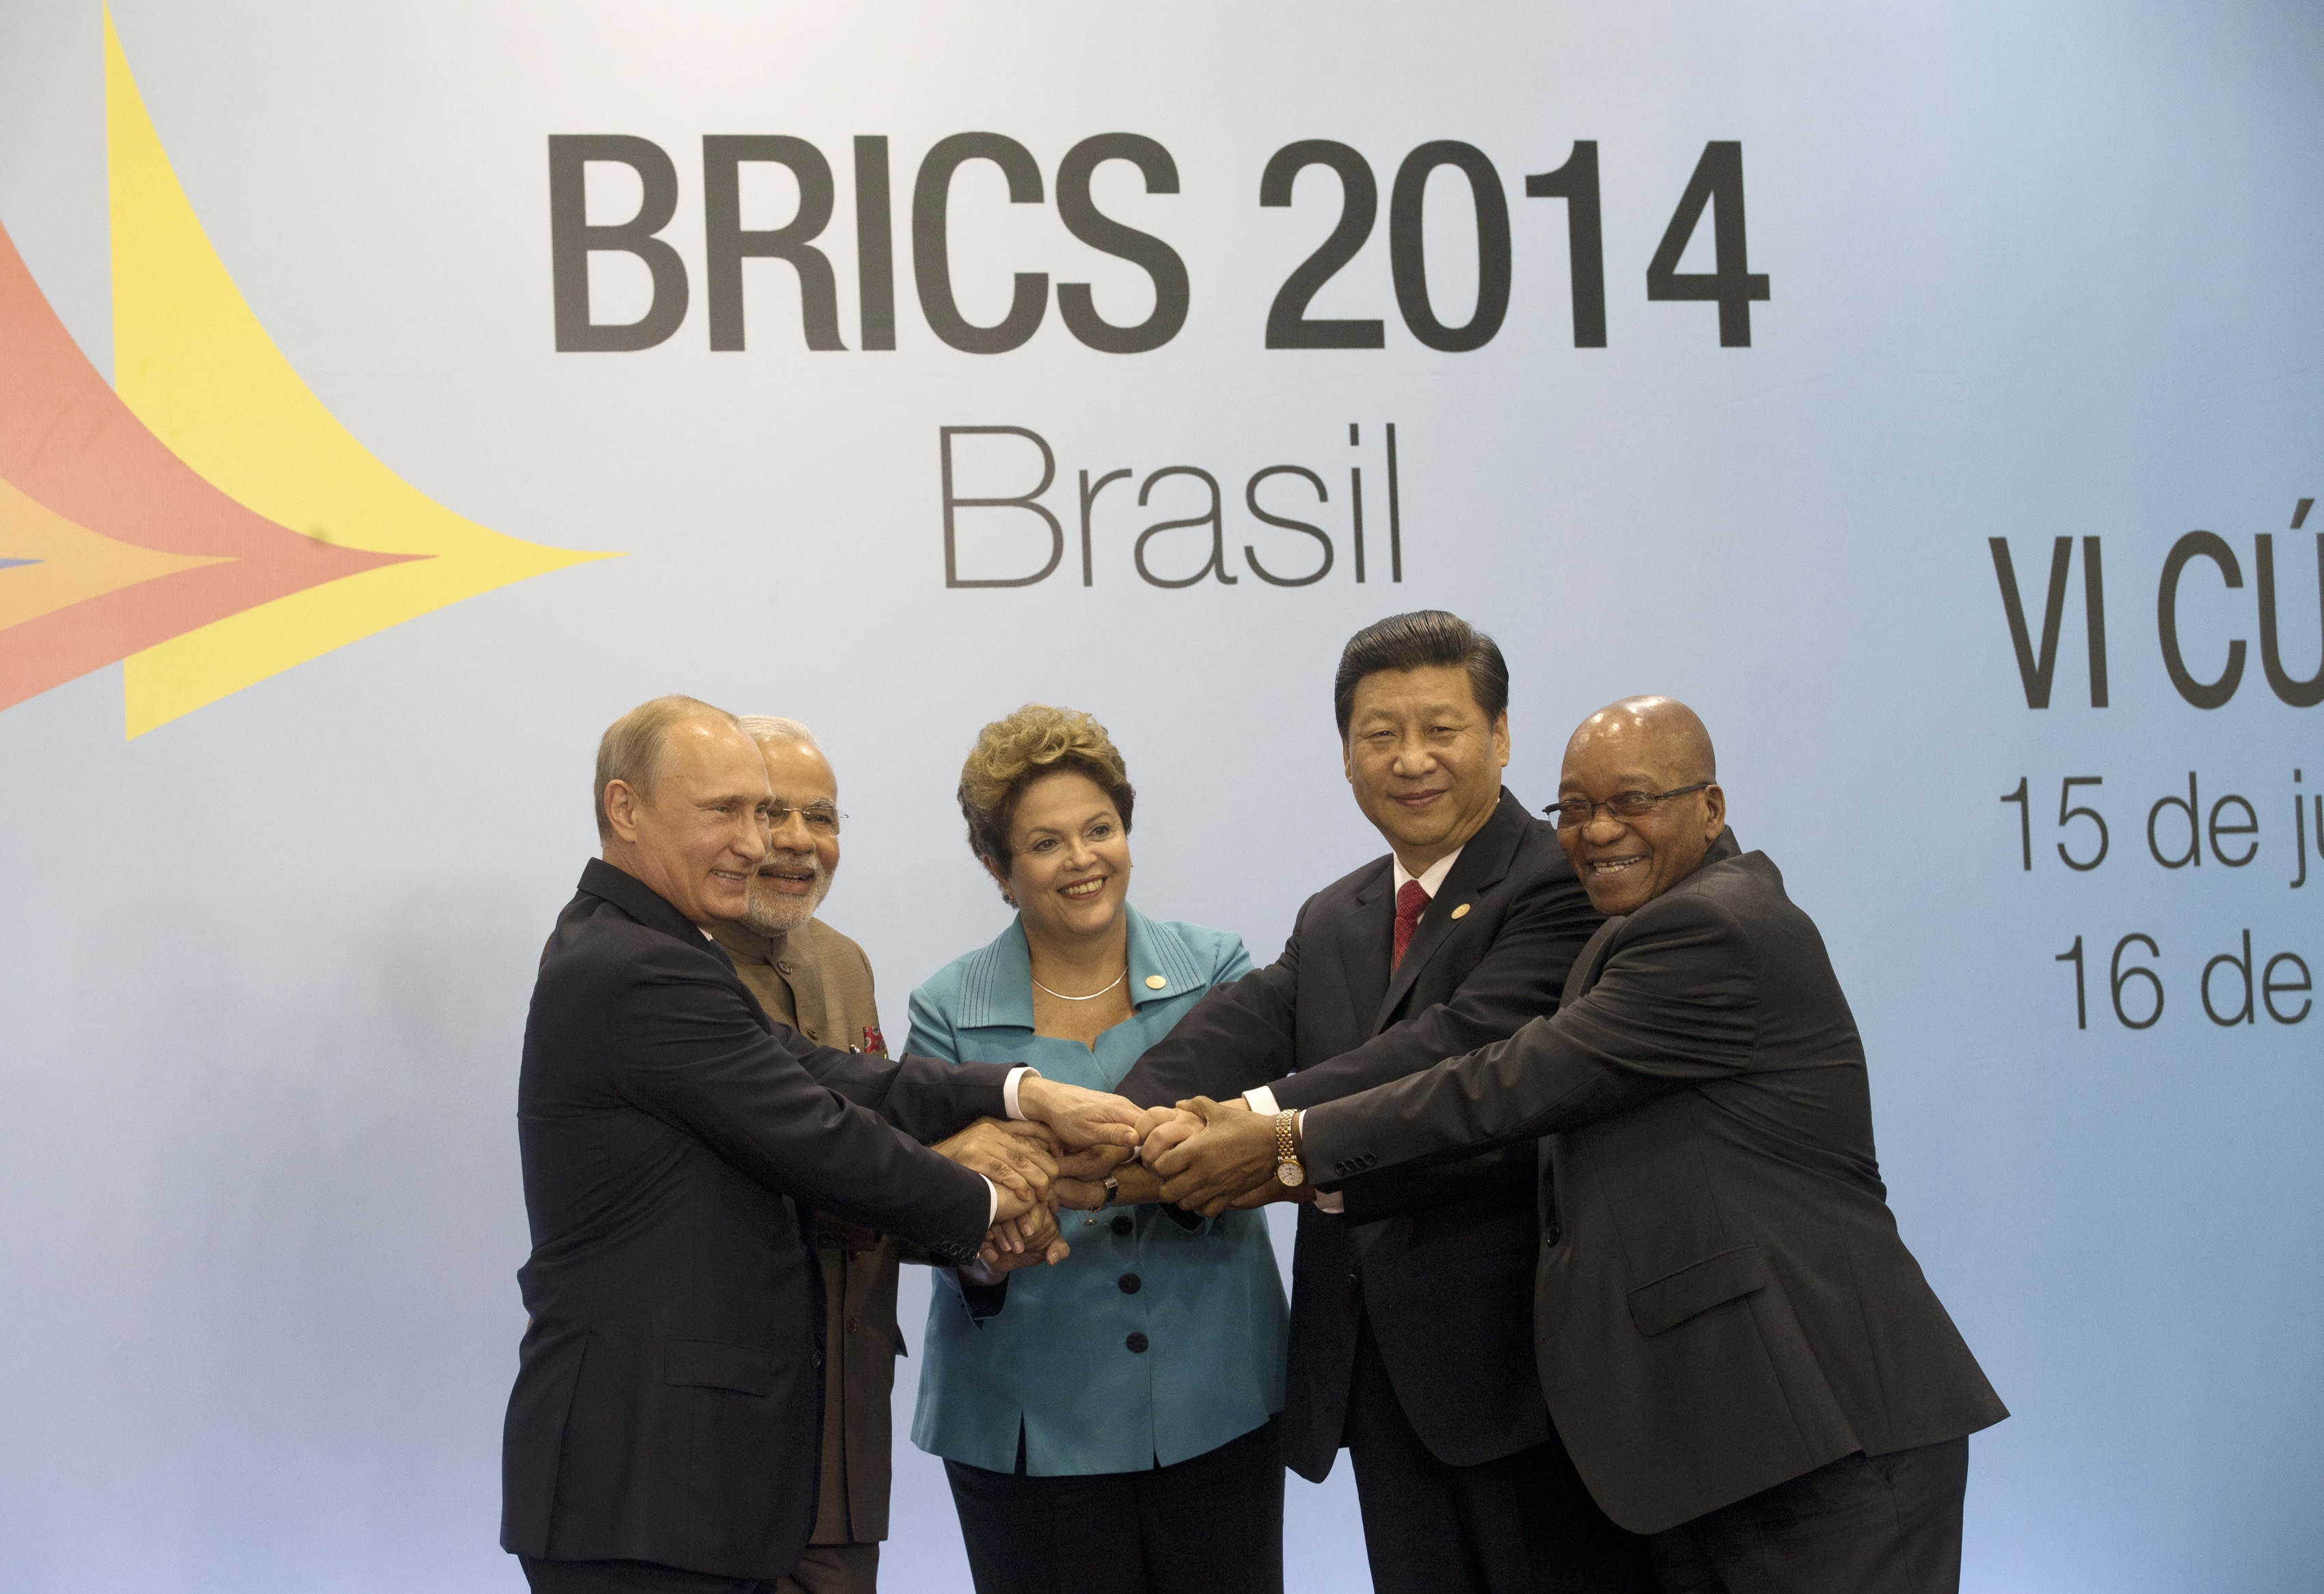 A new development bank was announced at the BRICS Summit in Brazil in July. It will be involved in development funding, but whether it contributes to official development assistance is a totally different matter.